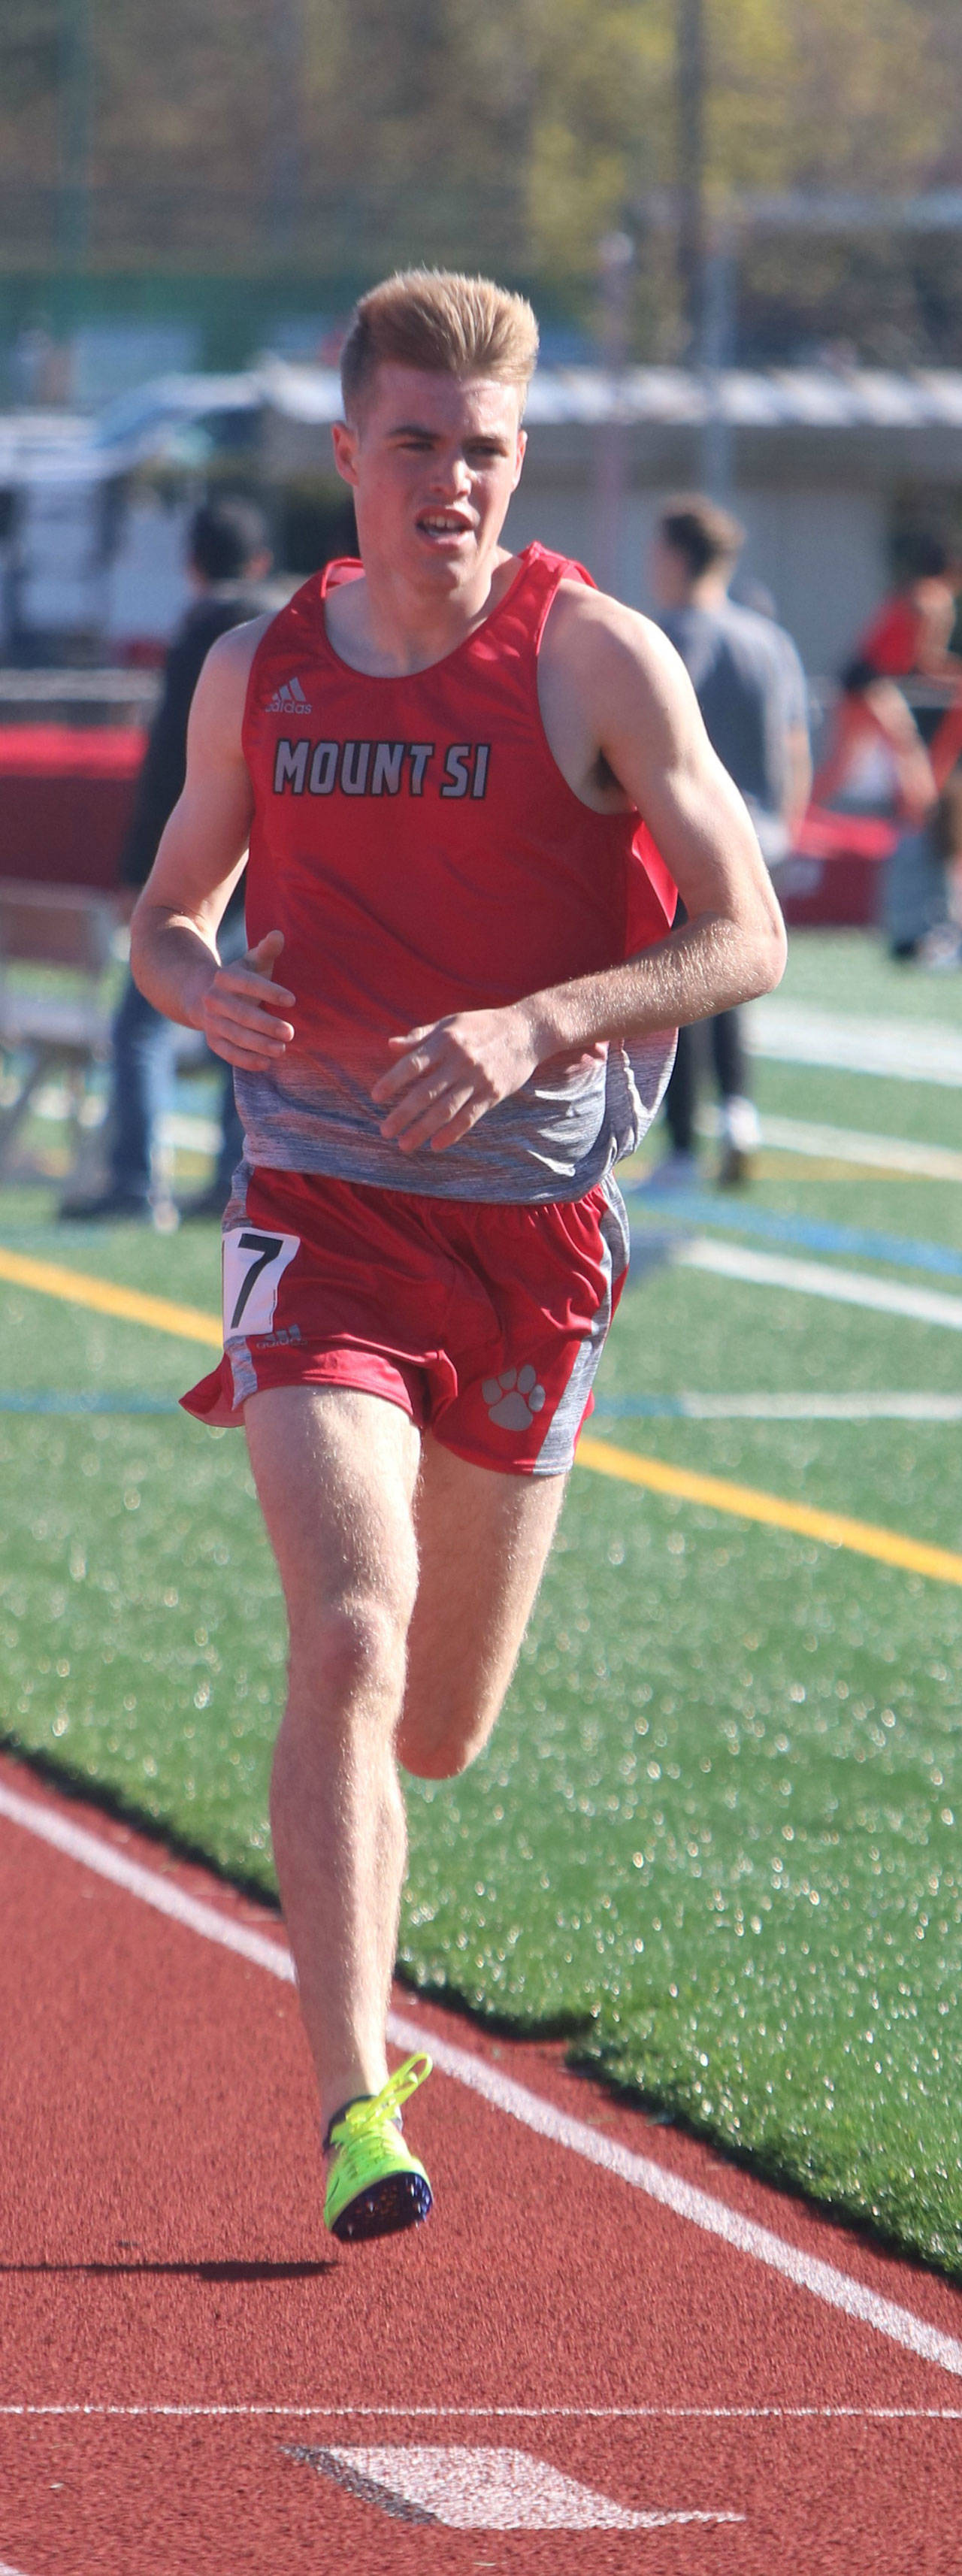 Mount Si High senior Joe Waskom runs to first place in the 1,600 in 4:14.17 on April 17 at Newport High. That time is tops in the 4A state rankings at press time. He is also first in the 4A state rankings in the 3,200 in 8:56.52, a personal record set at the Arcadia Invitational. Waskom won the 3,200 at 4A state last year with a time of 8:57.66. The strider is first in 4A KingCo and second in 4A state in the 800 with a mark of 1:56.62, also a PR. In the 3,000, Waskom tops the 4A state and district rankings with a 8:24.41, a PR set at Arcadia. Waskom — who won the 4A state cross country title last fall — is first in 4A KingCo and 4A District 2 in the 800, 1,600 and 3,200 races. Andy Nystrom / staff photo